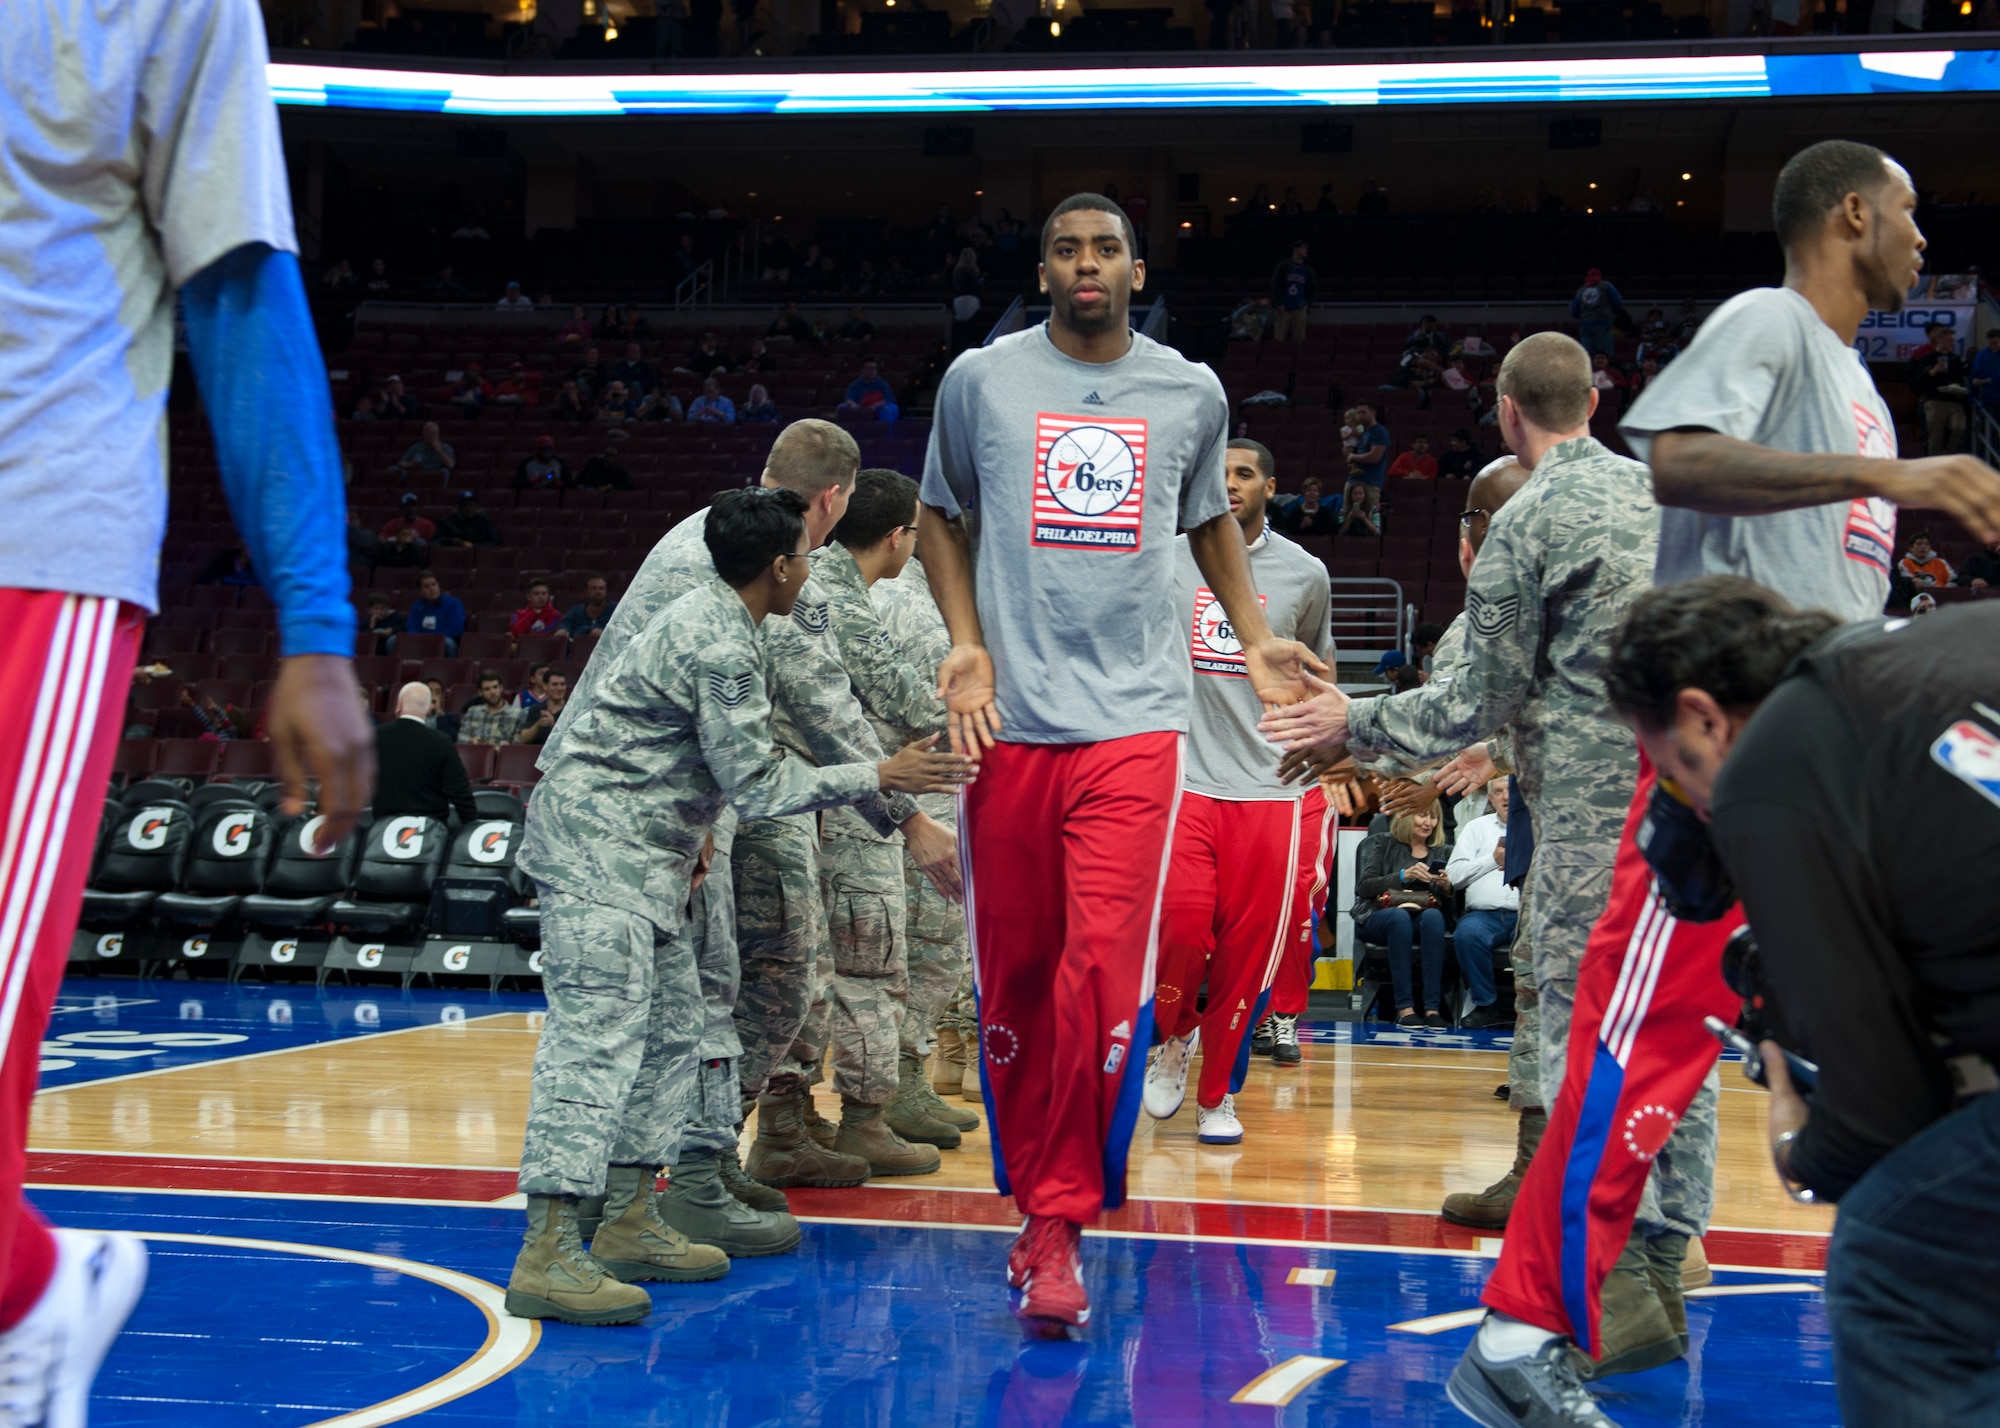 Hollis Thompson, 76ers guard/forward, and the rest of the 76ers team high-five U.S. military service members prior to a Chicago Bulls versus Philadelphia 76ers basketball game Nov. 7, 2014, at the Wells Fargo Center, in Philadelphia. The 76ers organization hosted hundreds U.S. military servicemen for a special “Commitment to Service” night. (U.S. Air Force photo/Airman 1st Class Zachary Cacicia)